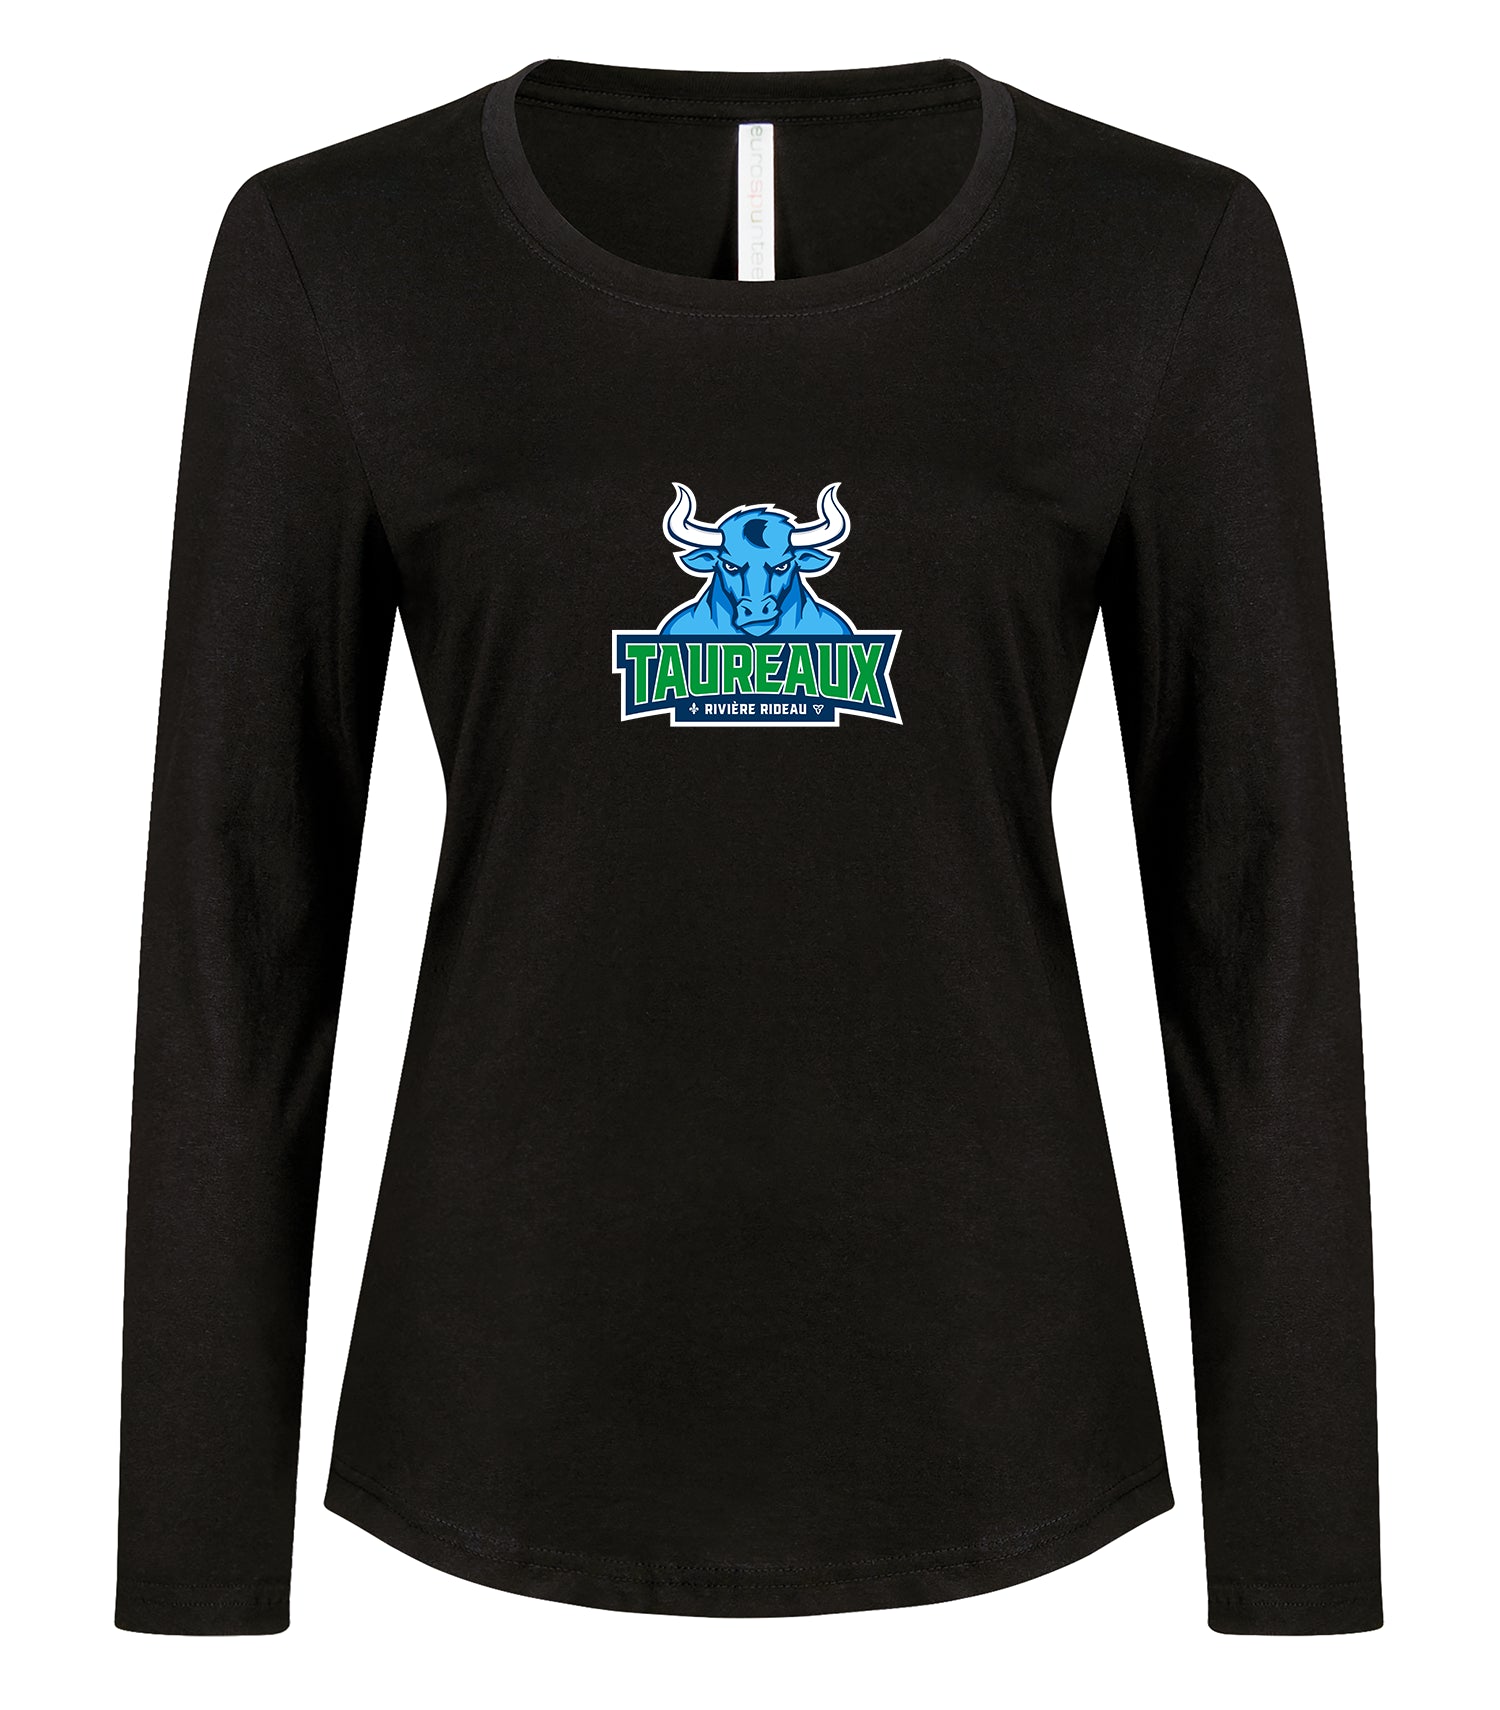 COMBED AND RING SPUN LONG SLEEVE LADIES&